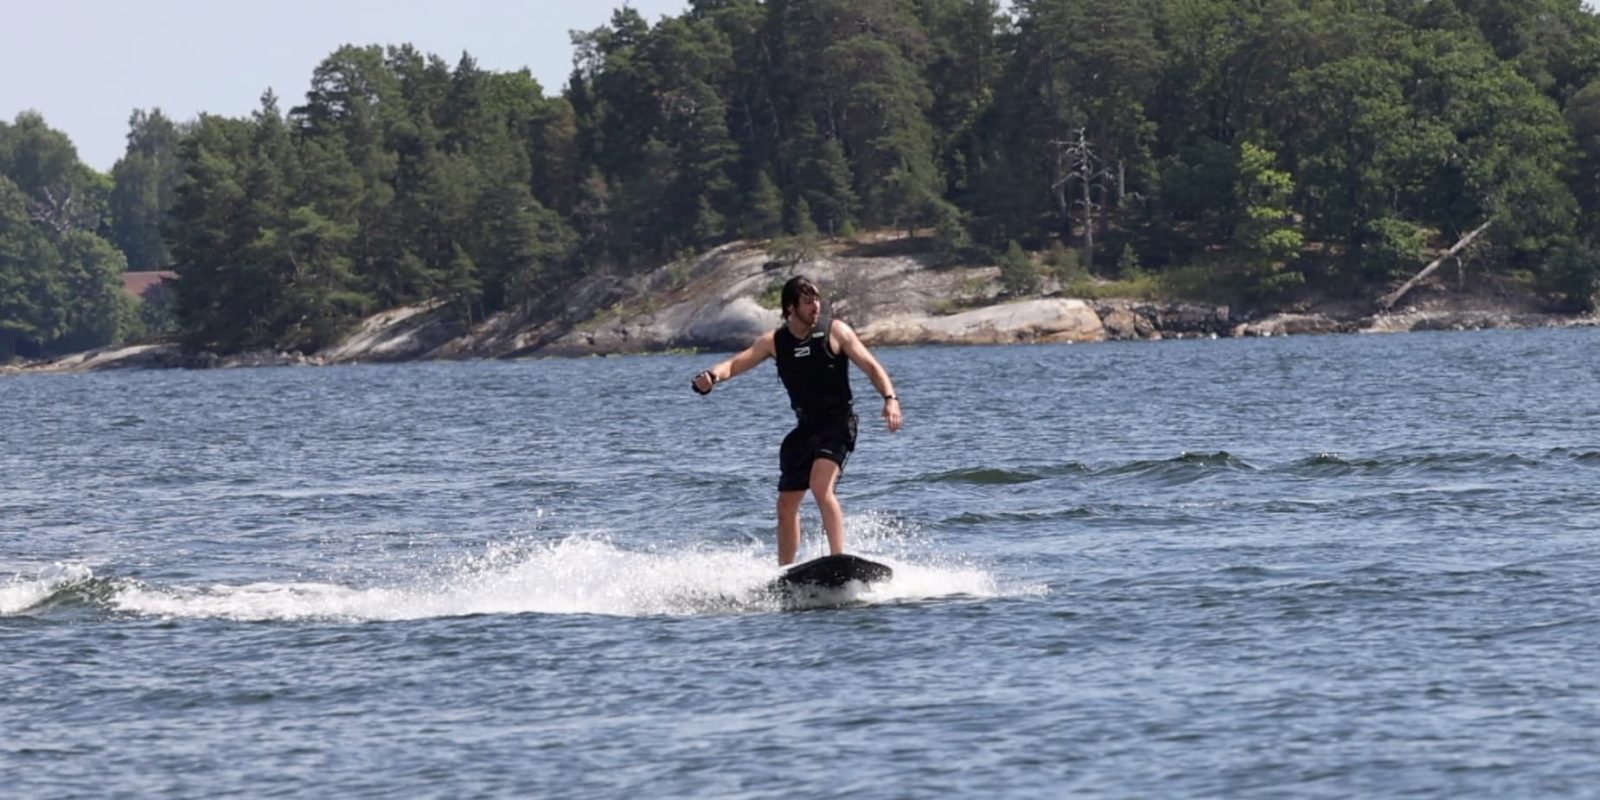 I tested Awake’s epic 37 mph electric surfboards and survived. Here’s how it went [with VIDEO]